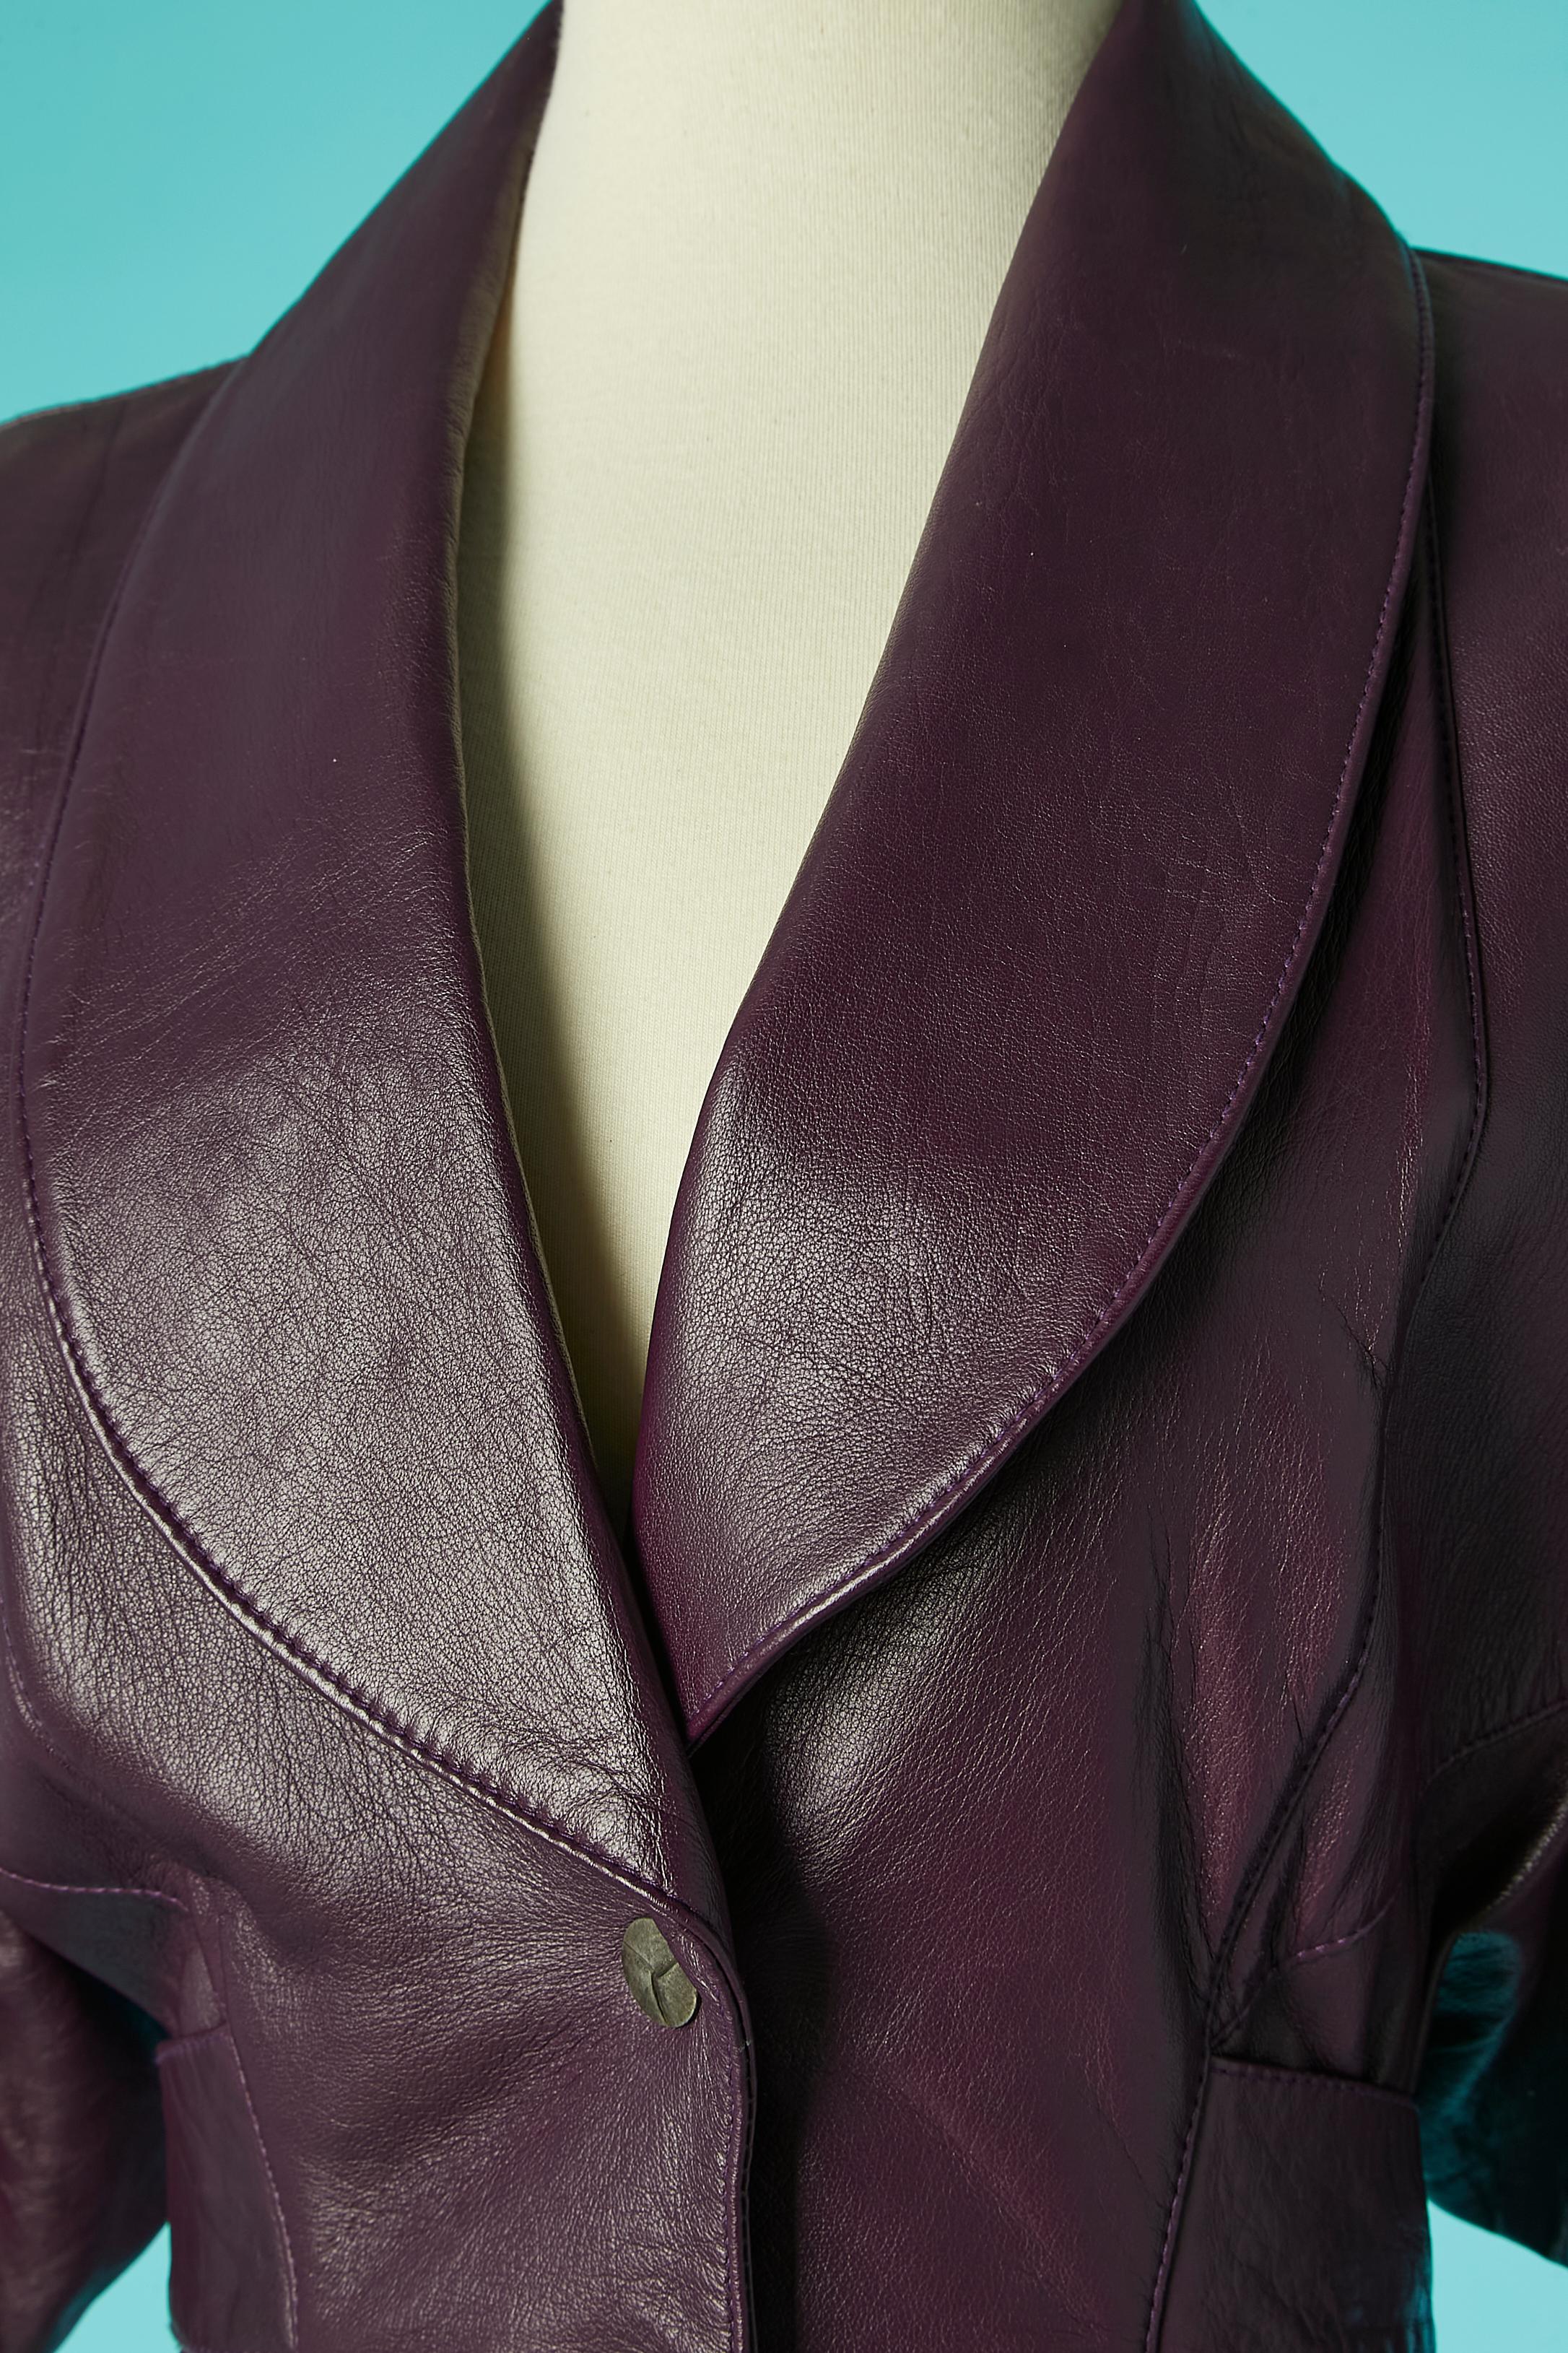 Purple leather dress with metallic snap in the middle front . One pocket with zip on the right side. Rayon lining. Shoulder-pads. Half- belt with buckle closure in the middle back. 
SIZE S 